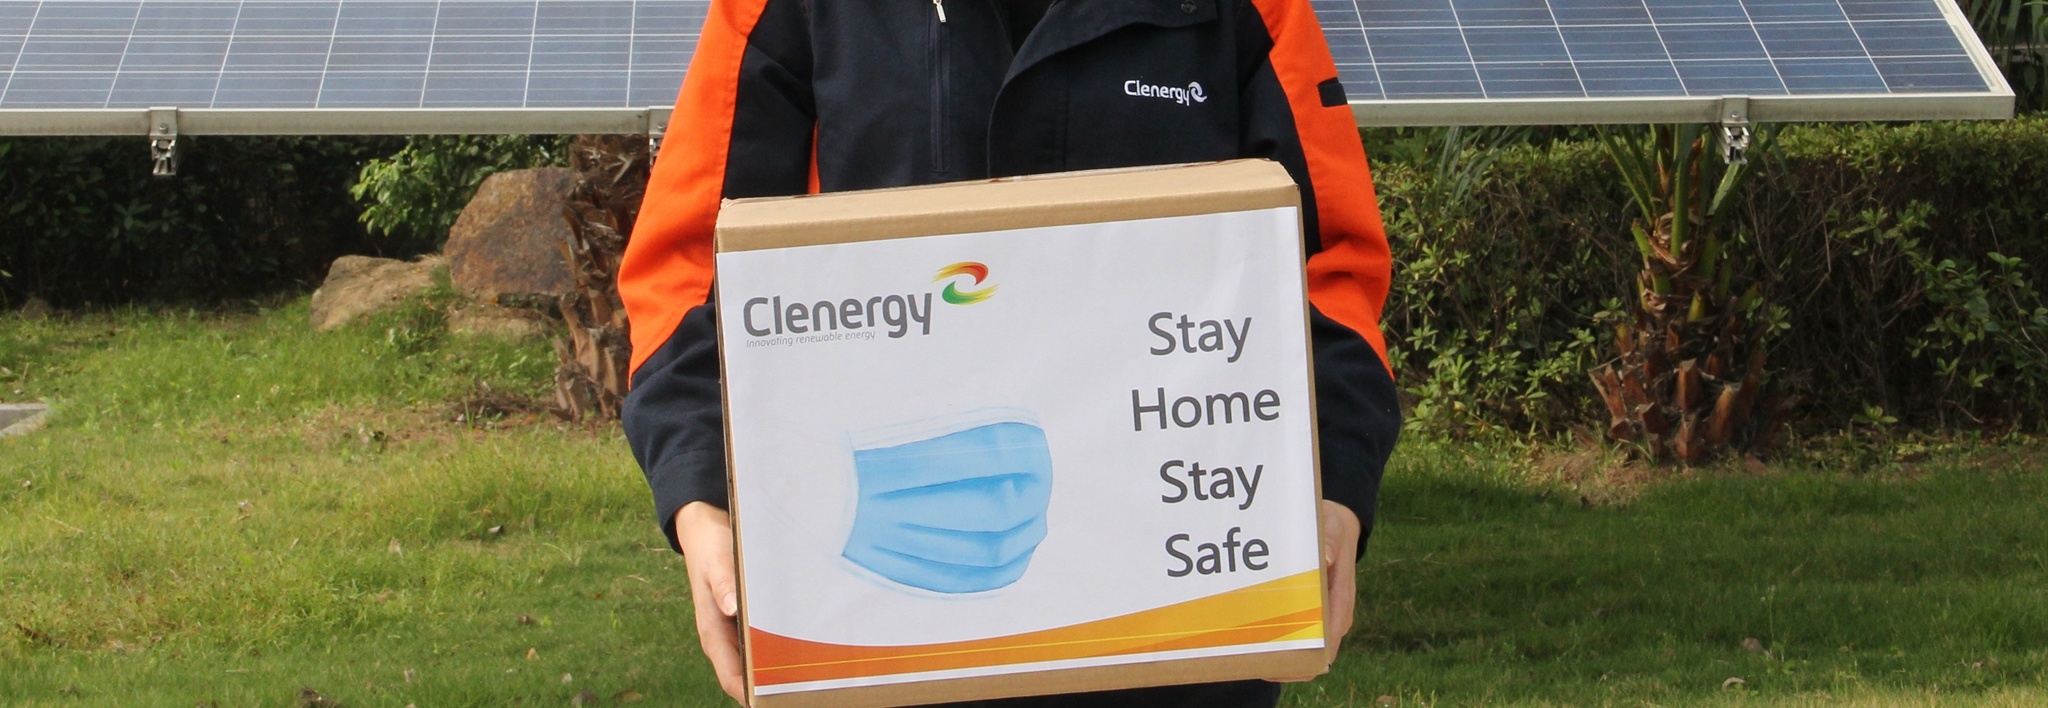 Clenergy Staff Holding a Box Full of Surgical Masks to be Donated in 2020